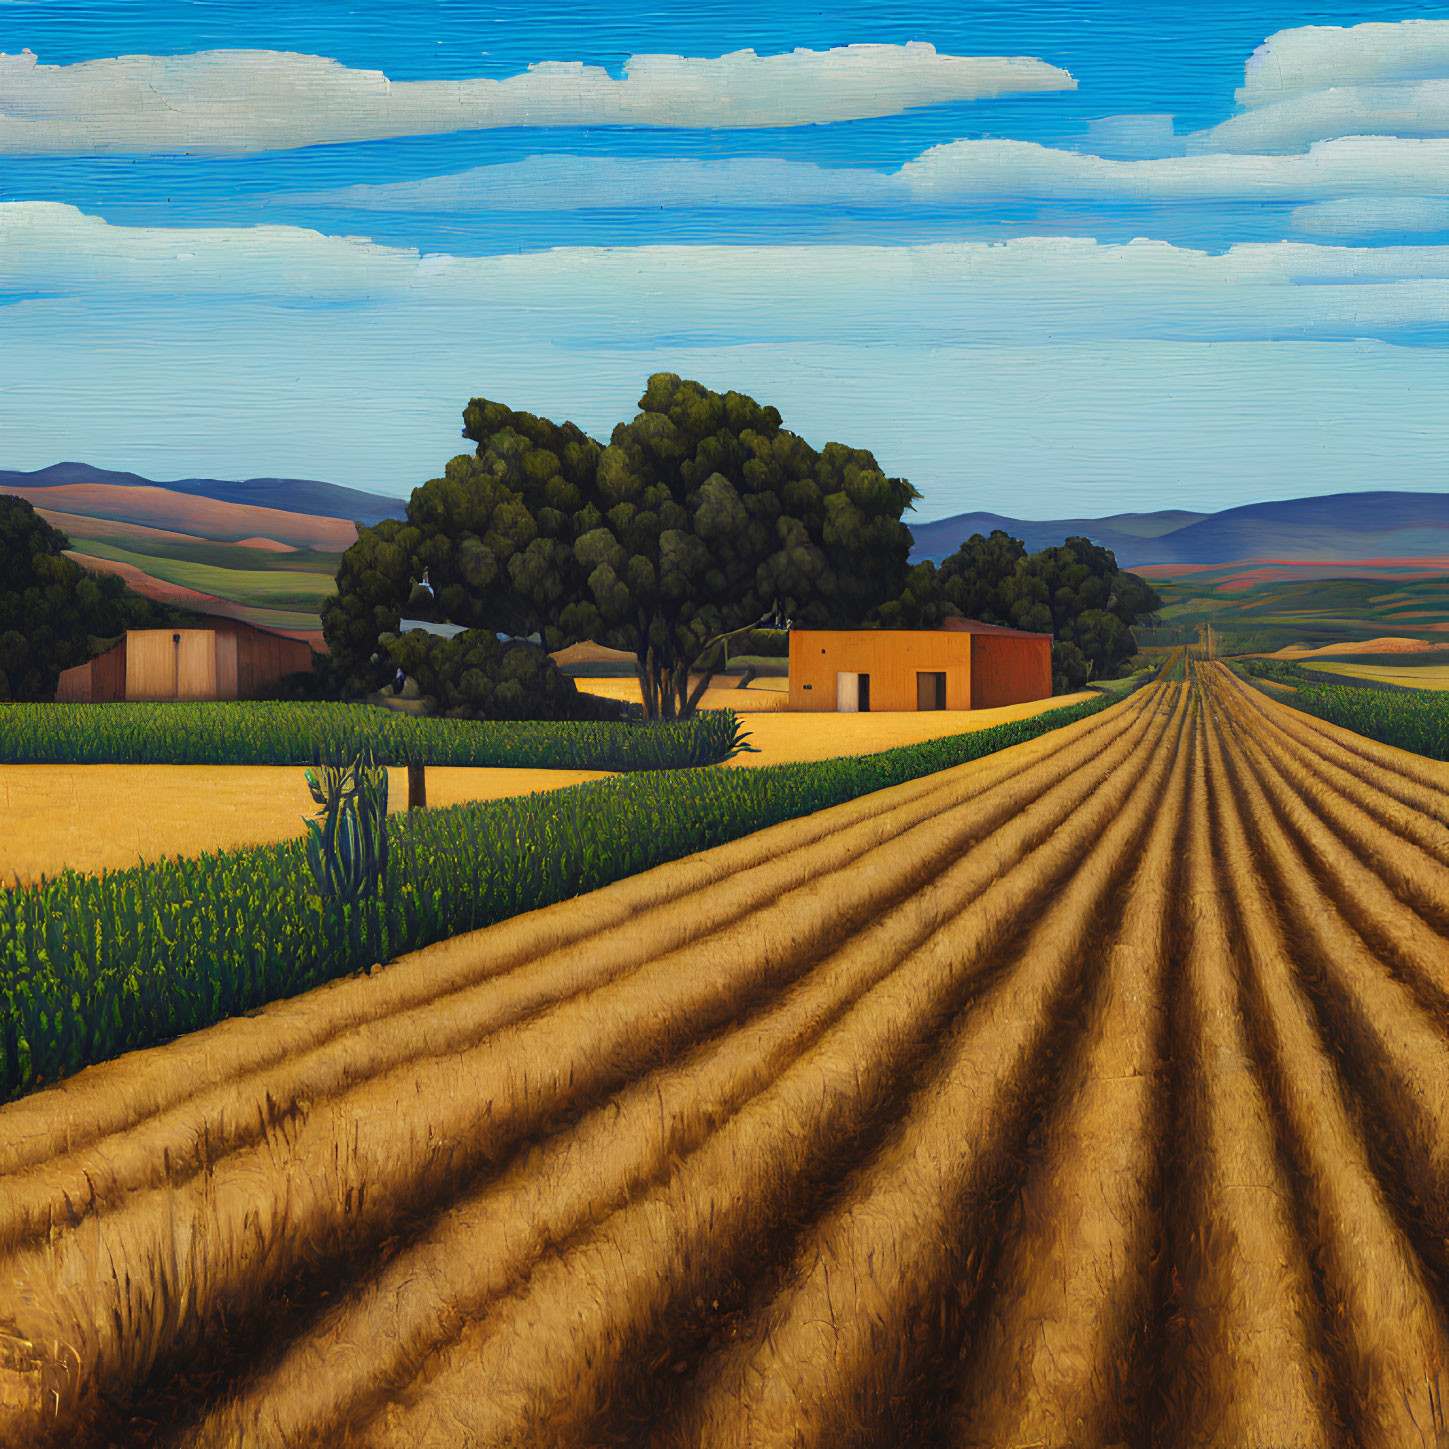 Colorful landscape painting of farm with fields, house, trees under blue sky.